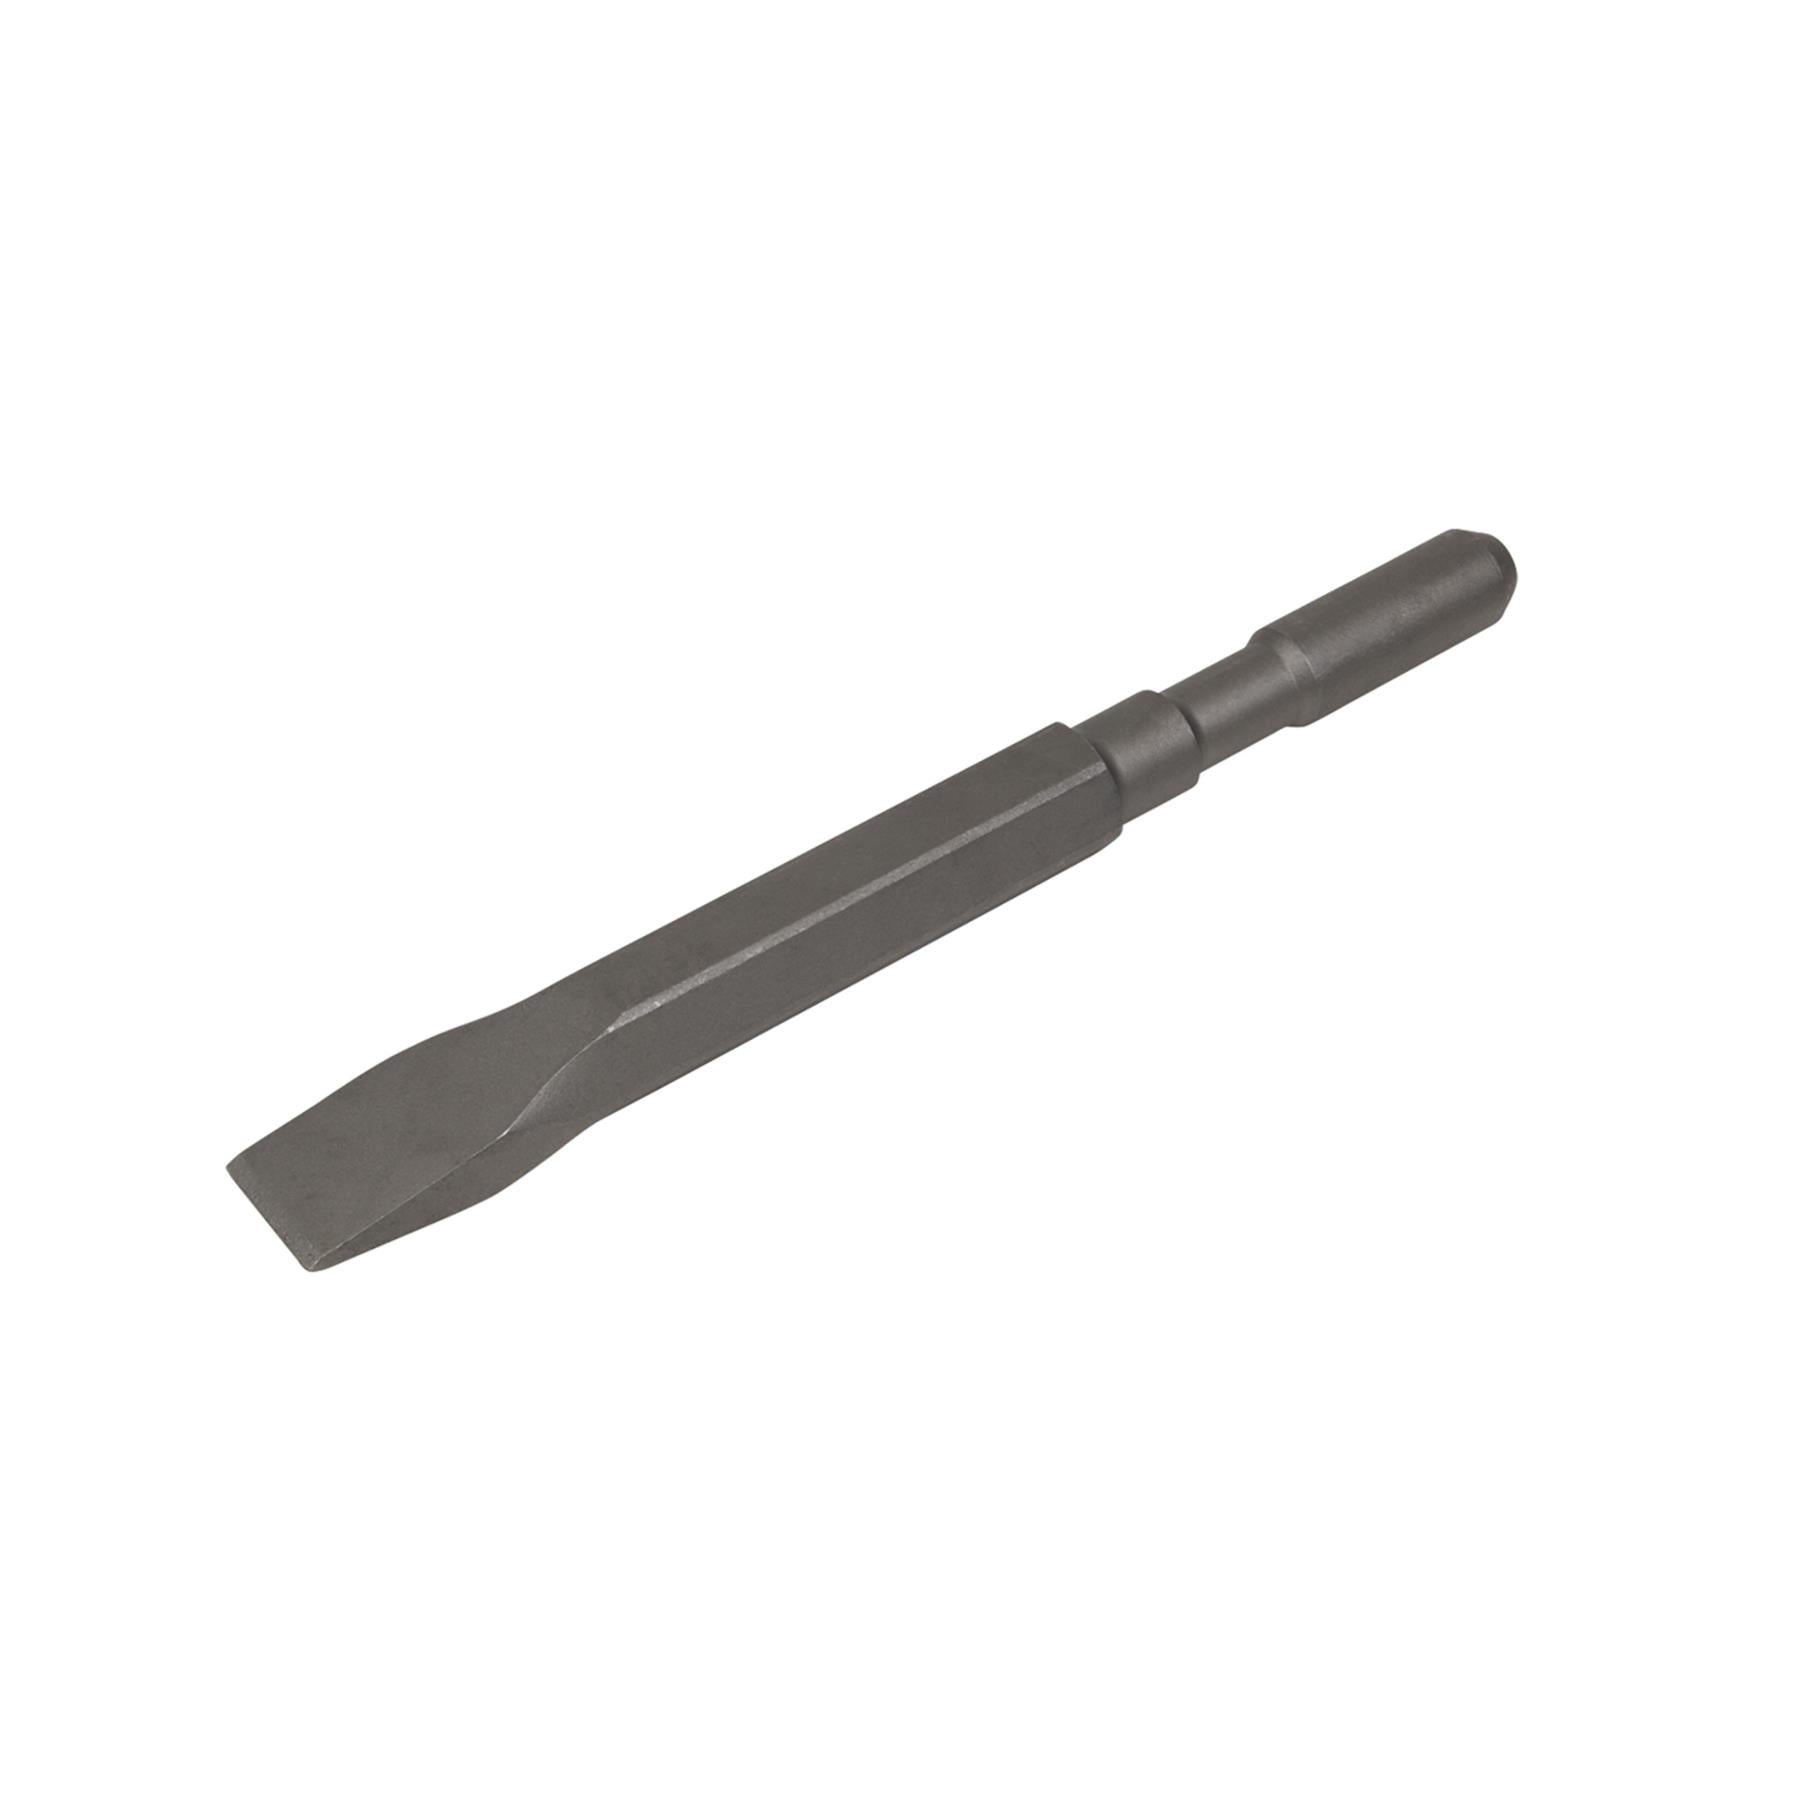 Sealey Chisel 25 x 250mm - CP9